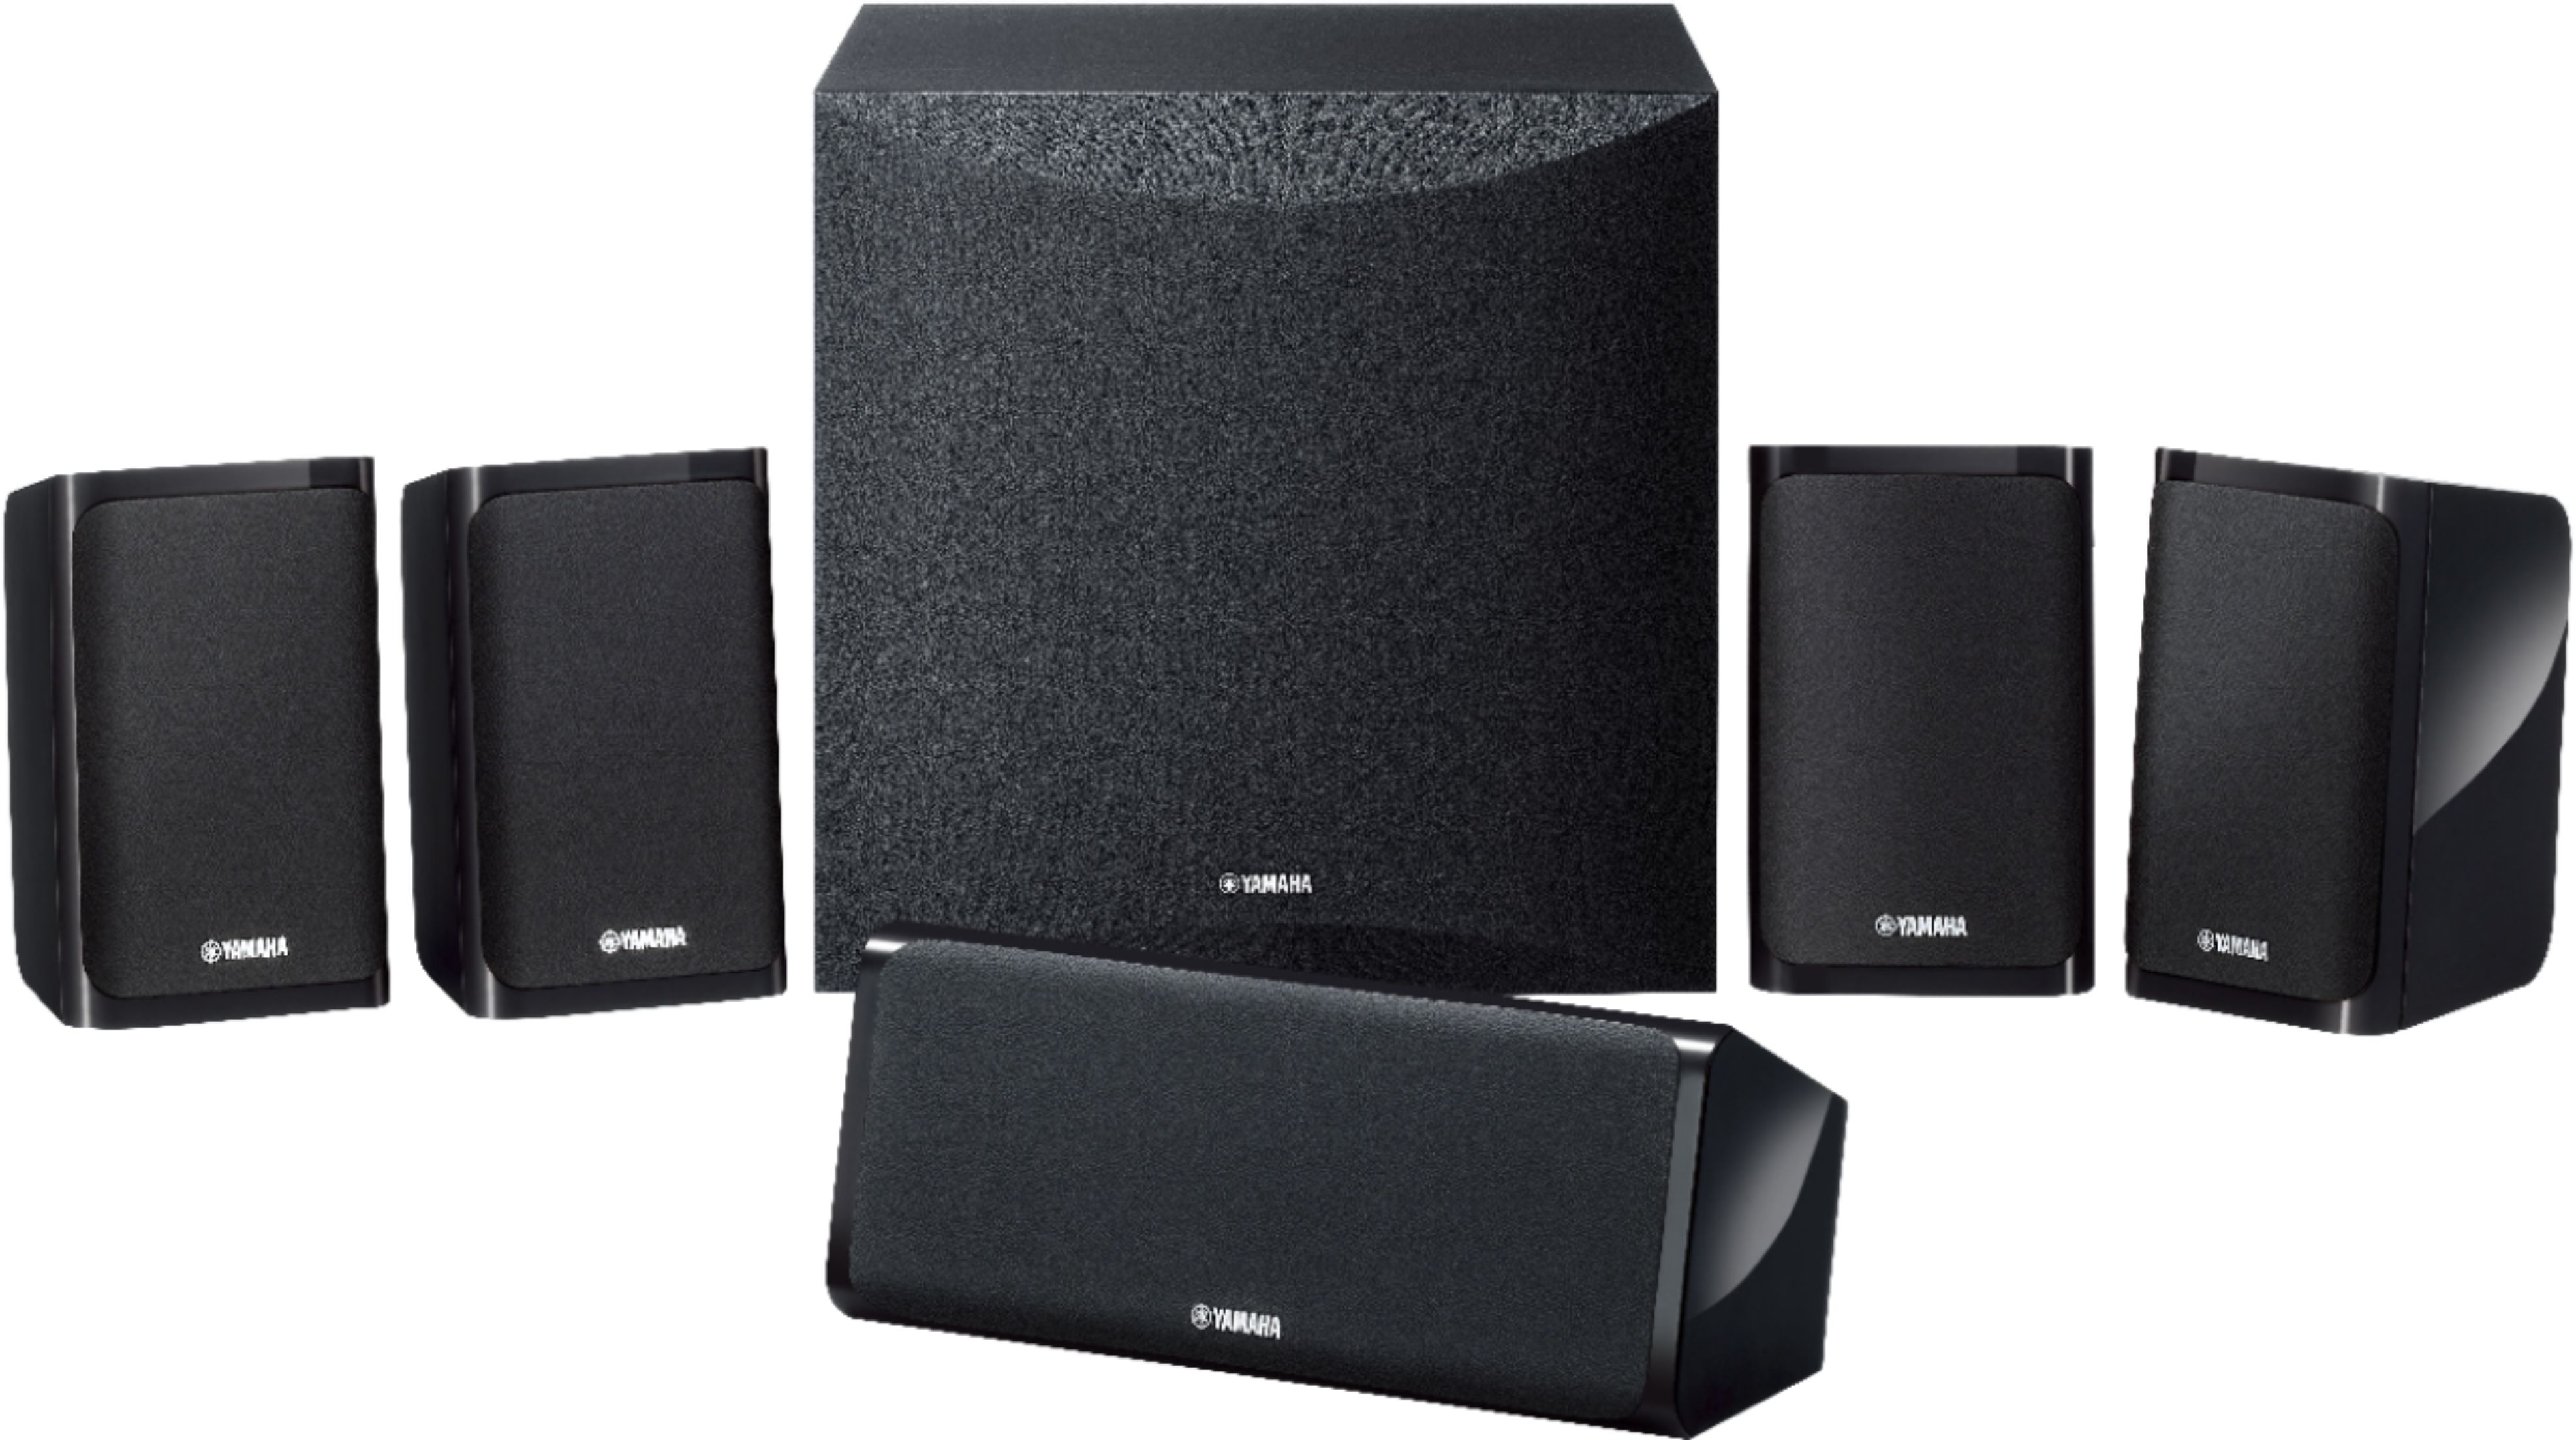 Product Review: Yamaha YHT1840 5.1 package system - Richer Sounds Blog